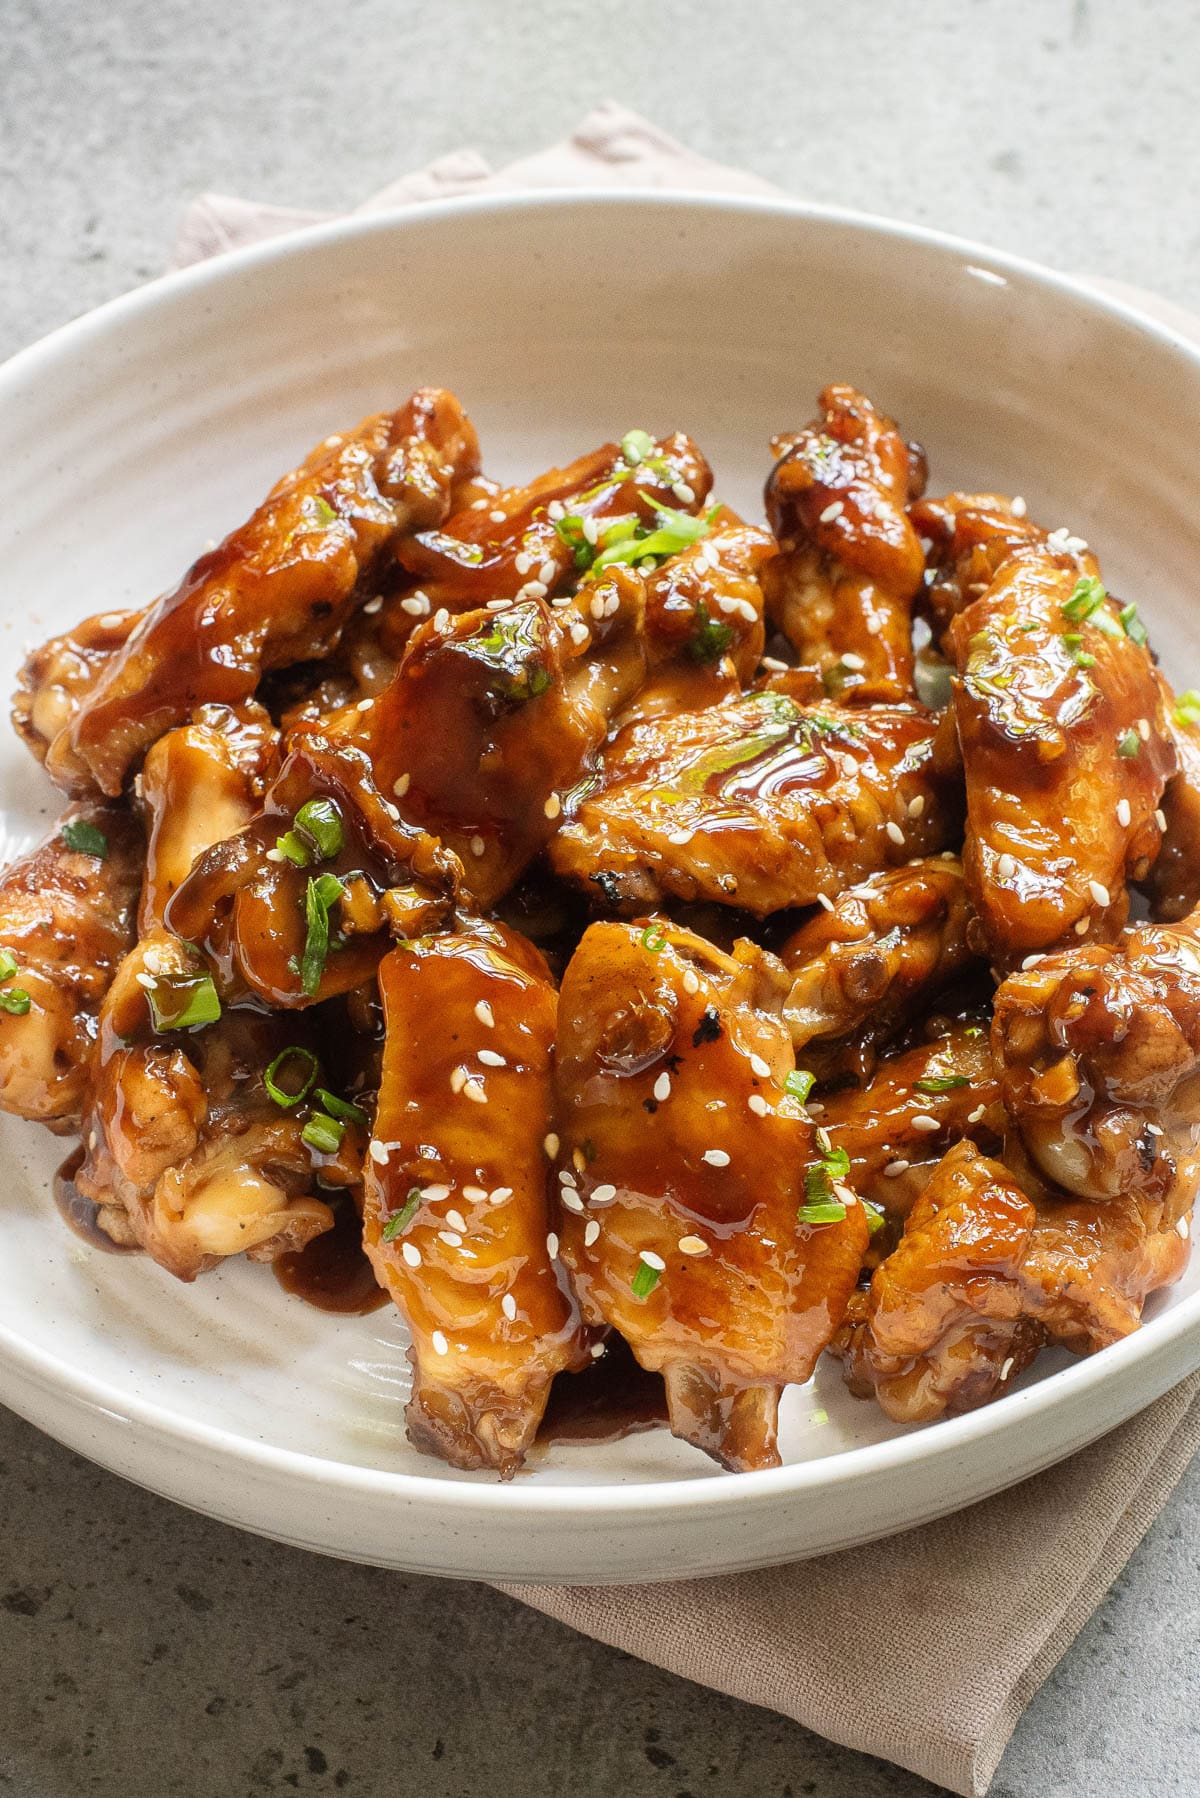 Saucy chicken wings in a white bowl with sesame seeds and green onions.